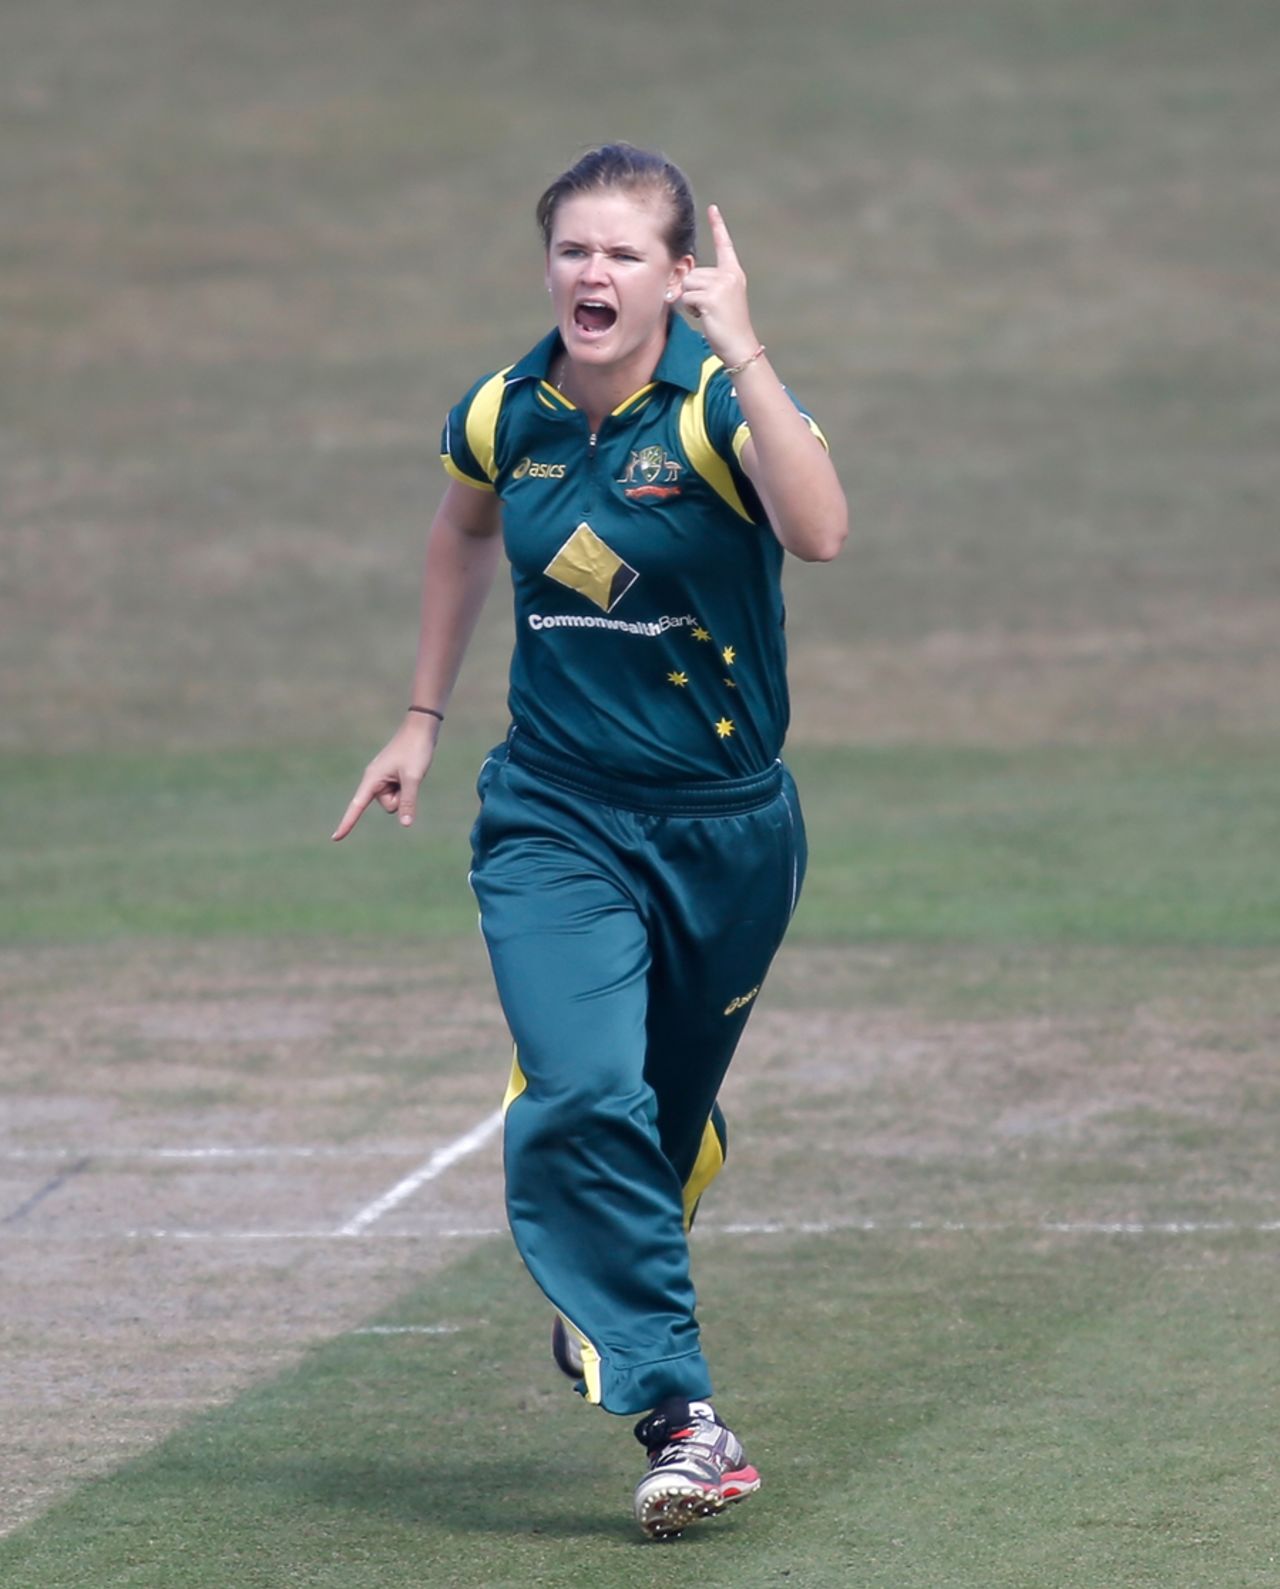 Jess Jonassen was the most effective of Australia's bowlers with 2 for 29, England v Australia, 2nd women's ODI, Hove, August 23, 2013